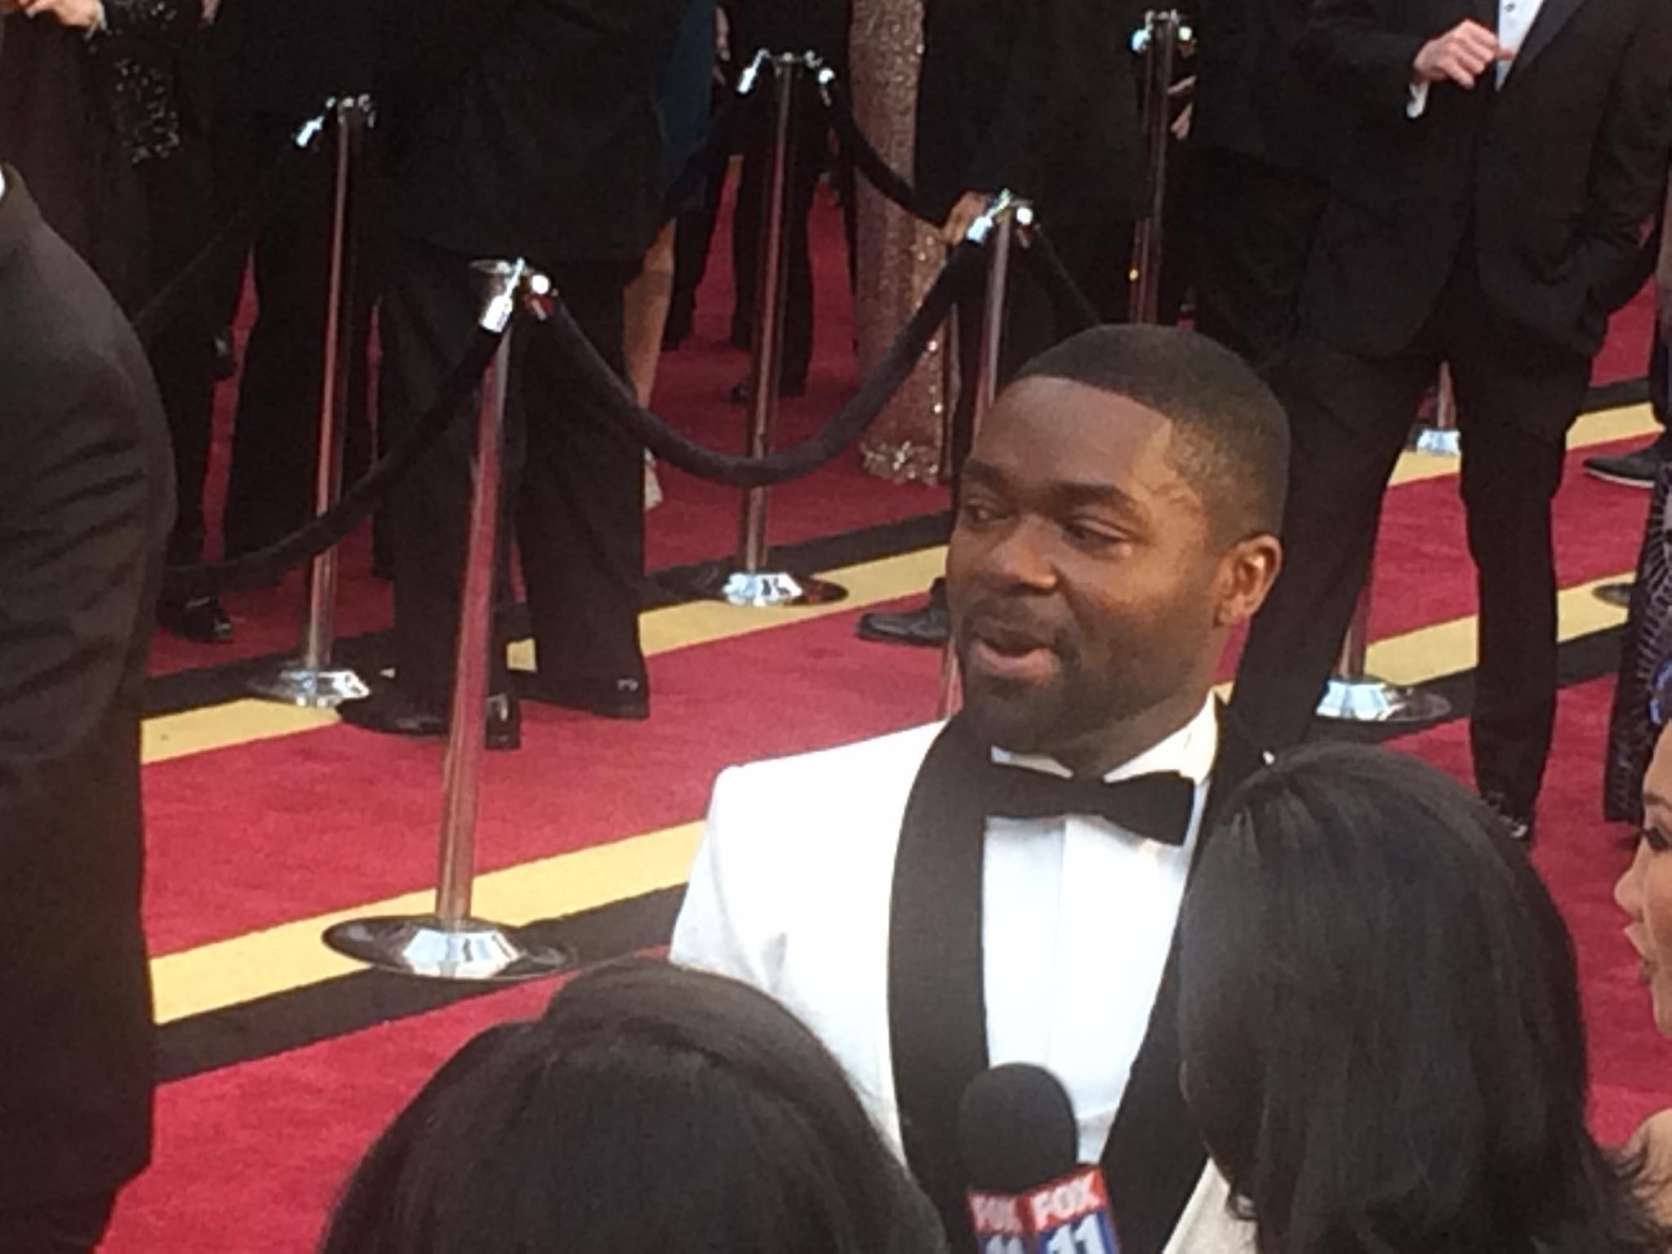 David Oyelowo answers questions on the red carpet. (WTOP/Jason Fraley)